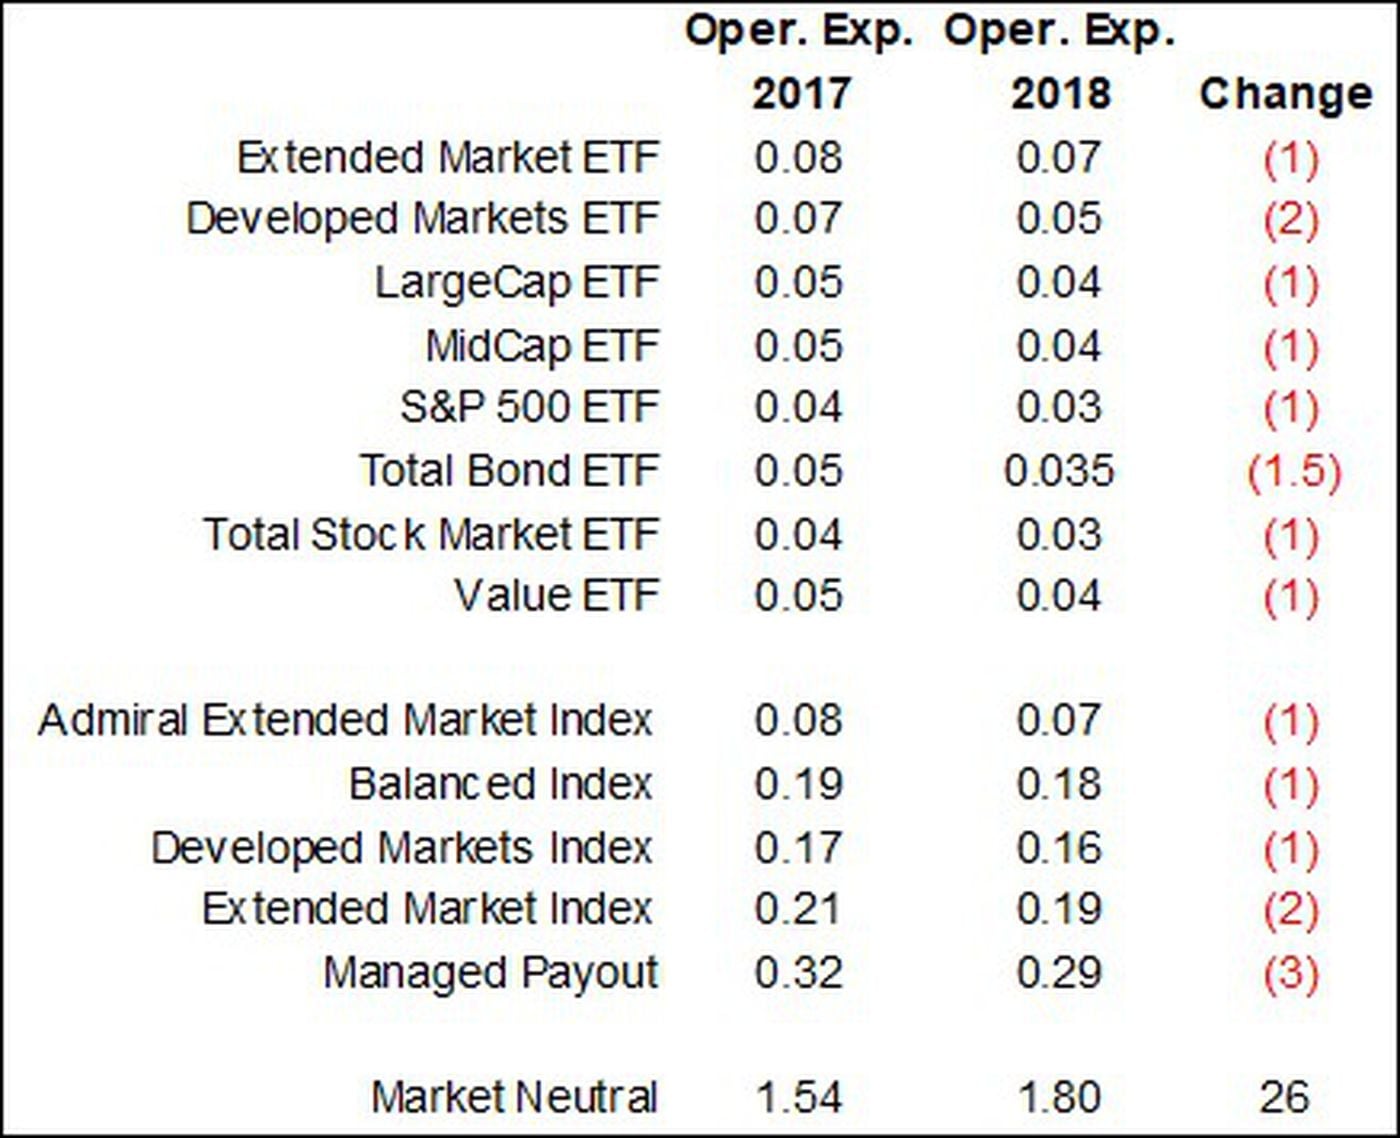 Vanguard Effect Sofi Launches Free Etf As Fee War Flares Among - vanguard cut fees on an additional 13 funds as of the end of dec 2018